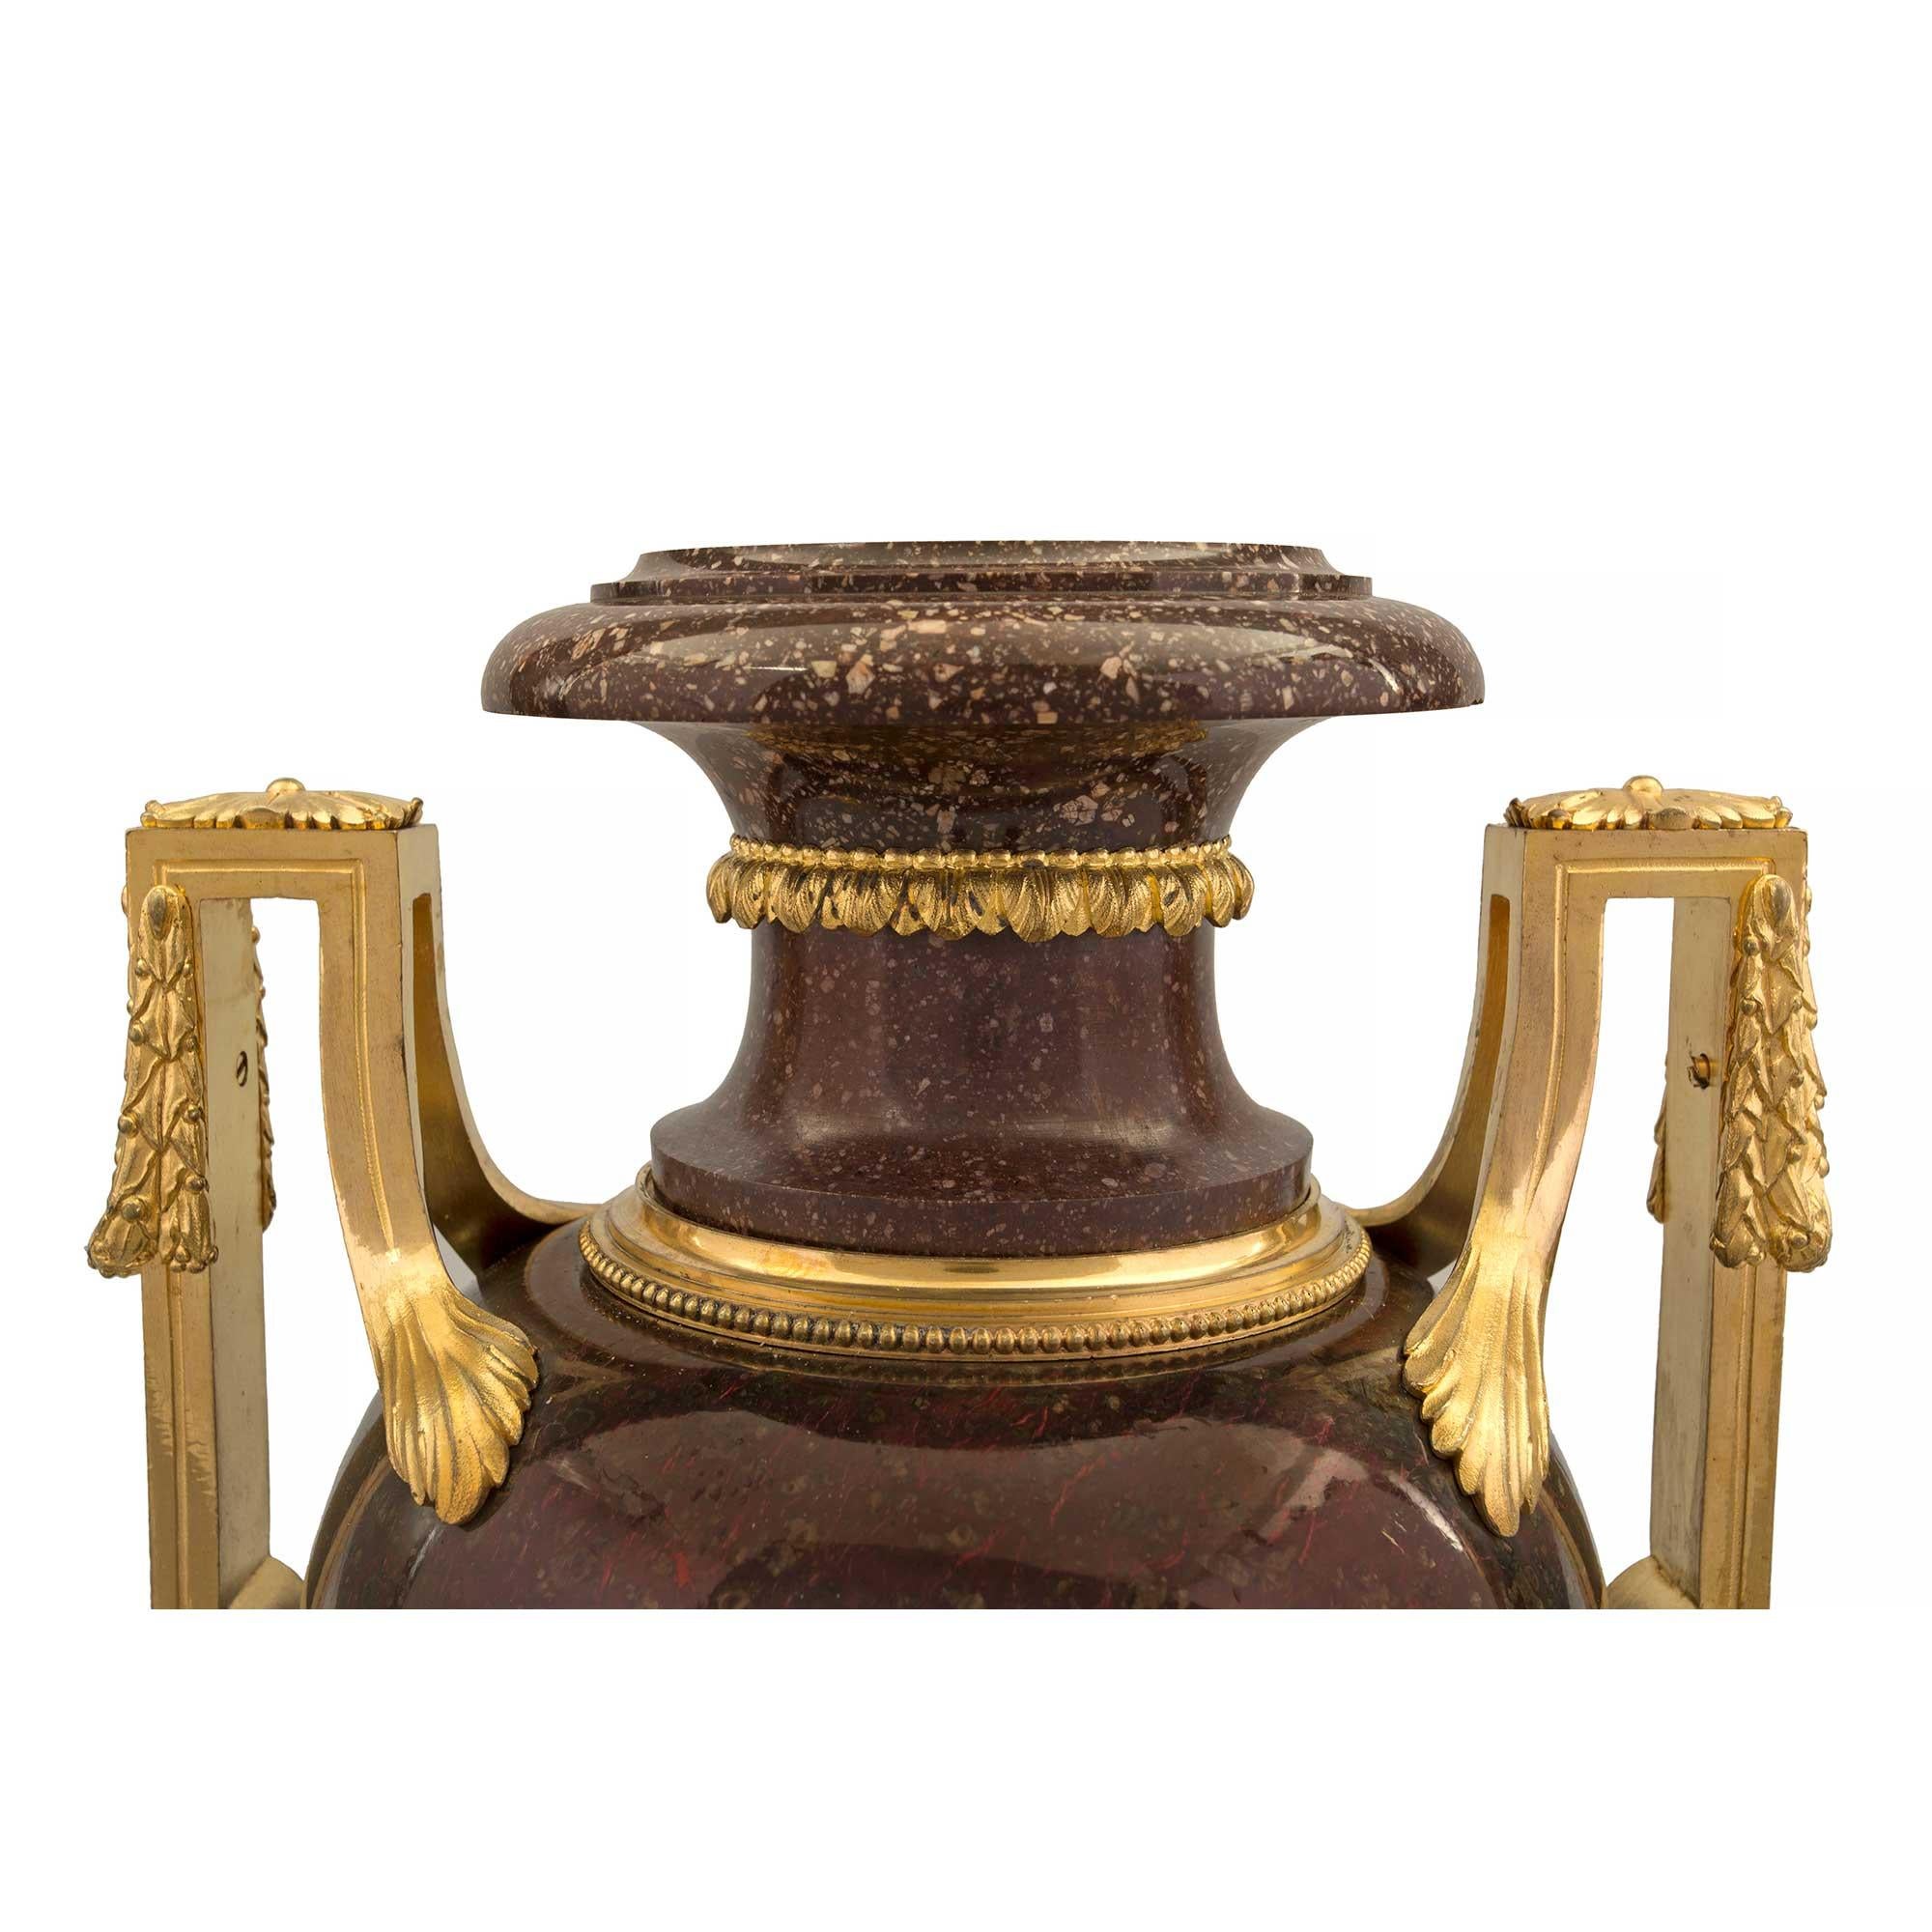 French Early 19th Century Louis XVI Style Porphyry and Ormolu Urns For Sale 2